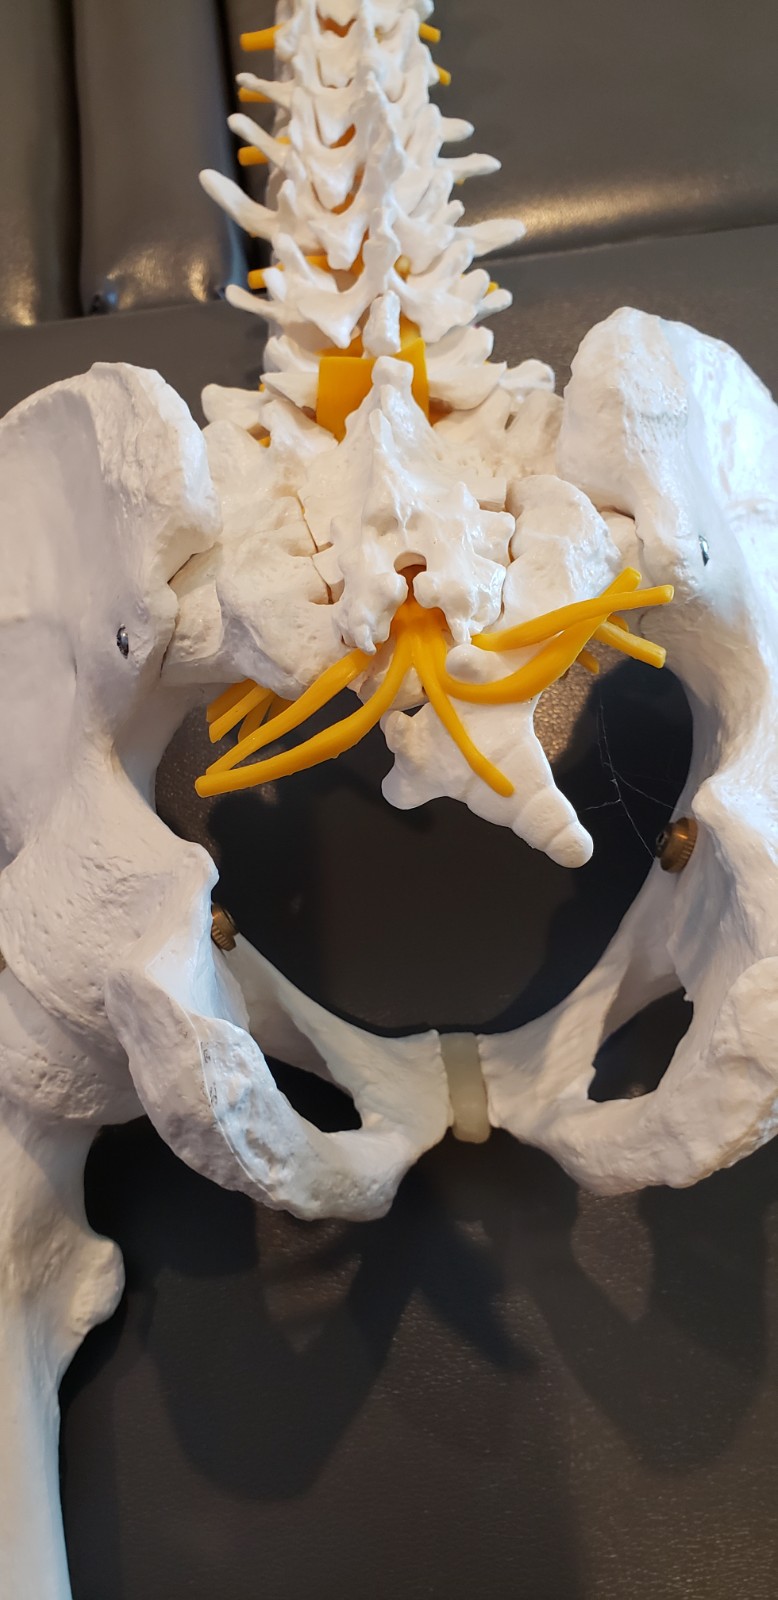 spinal model showing the tailbone or coccyx misaligned